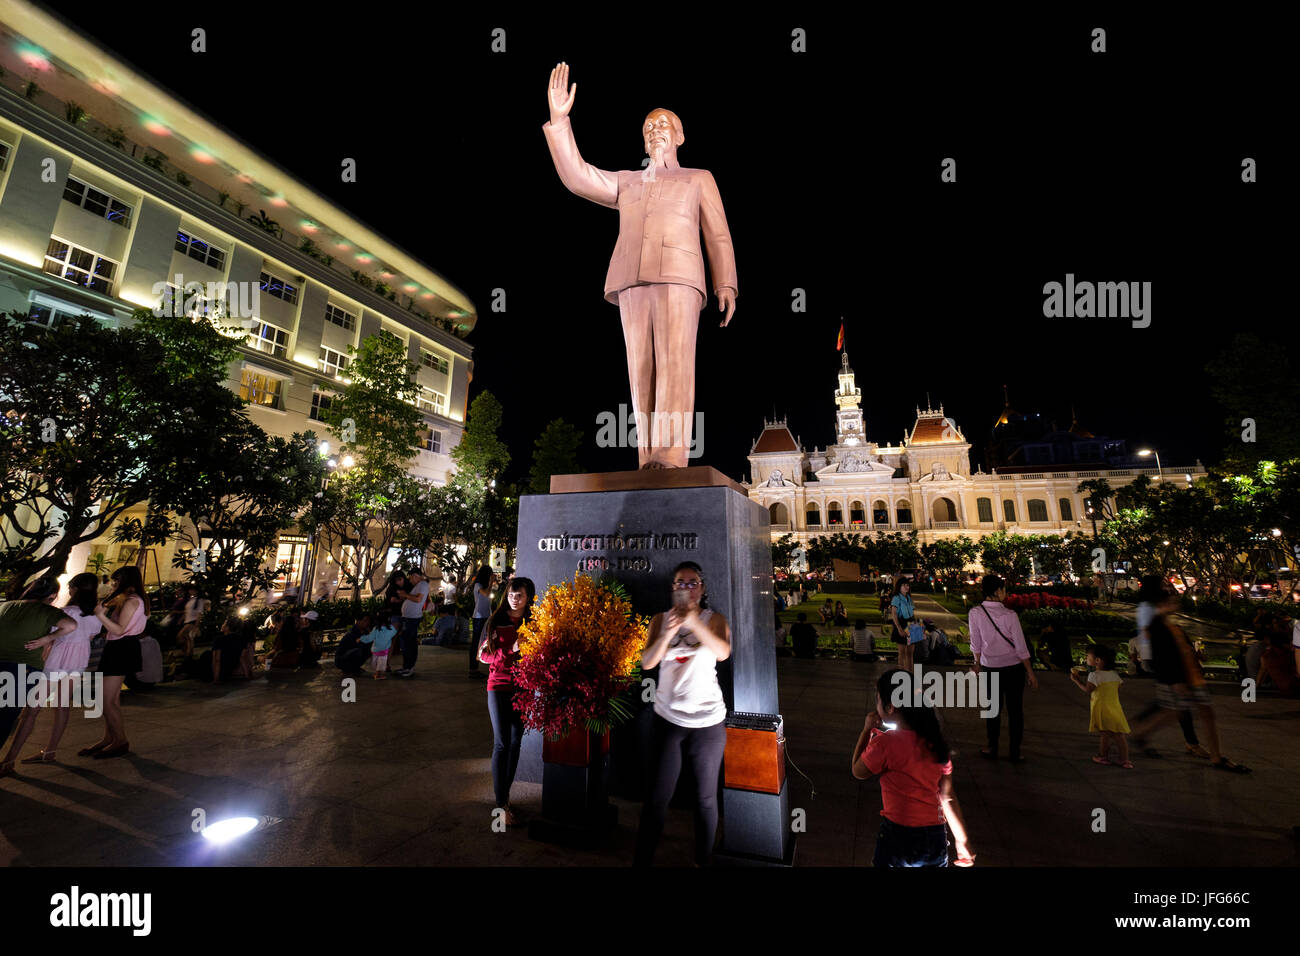 Statue of communist leader Ho Chi Minh in front of the City Hall building, Ho Chi Minh City, Vietnam, Asia Stock Photo